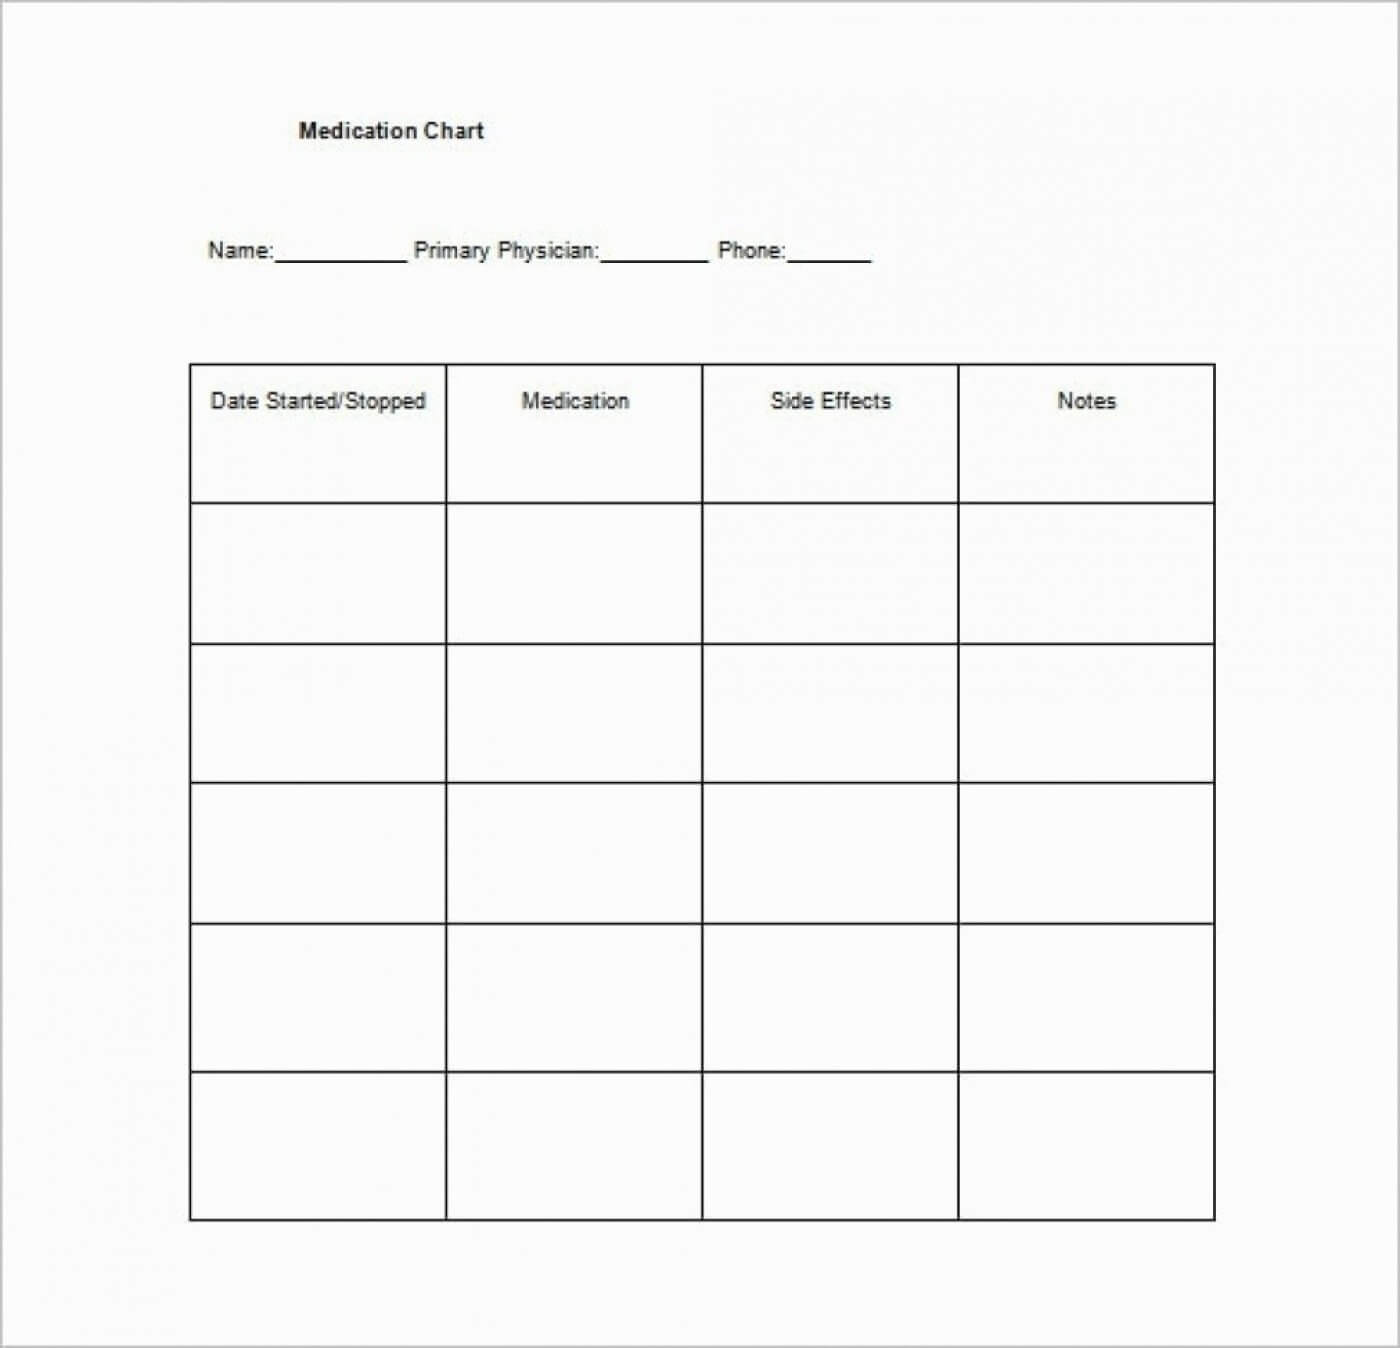 C5E58F Nursing Drug Cards Template | Wiring Resources Within Pharmacology Drug Card Template